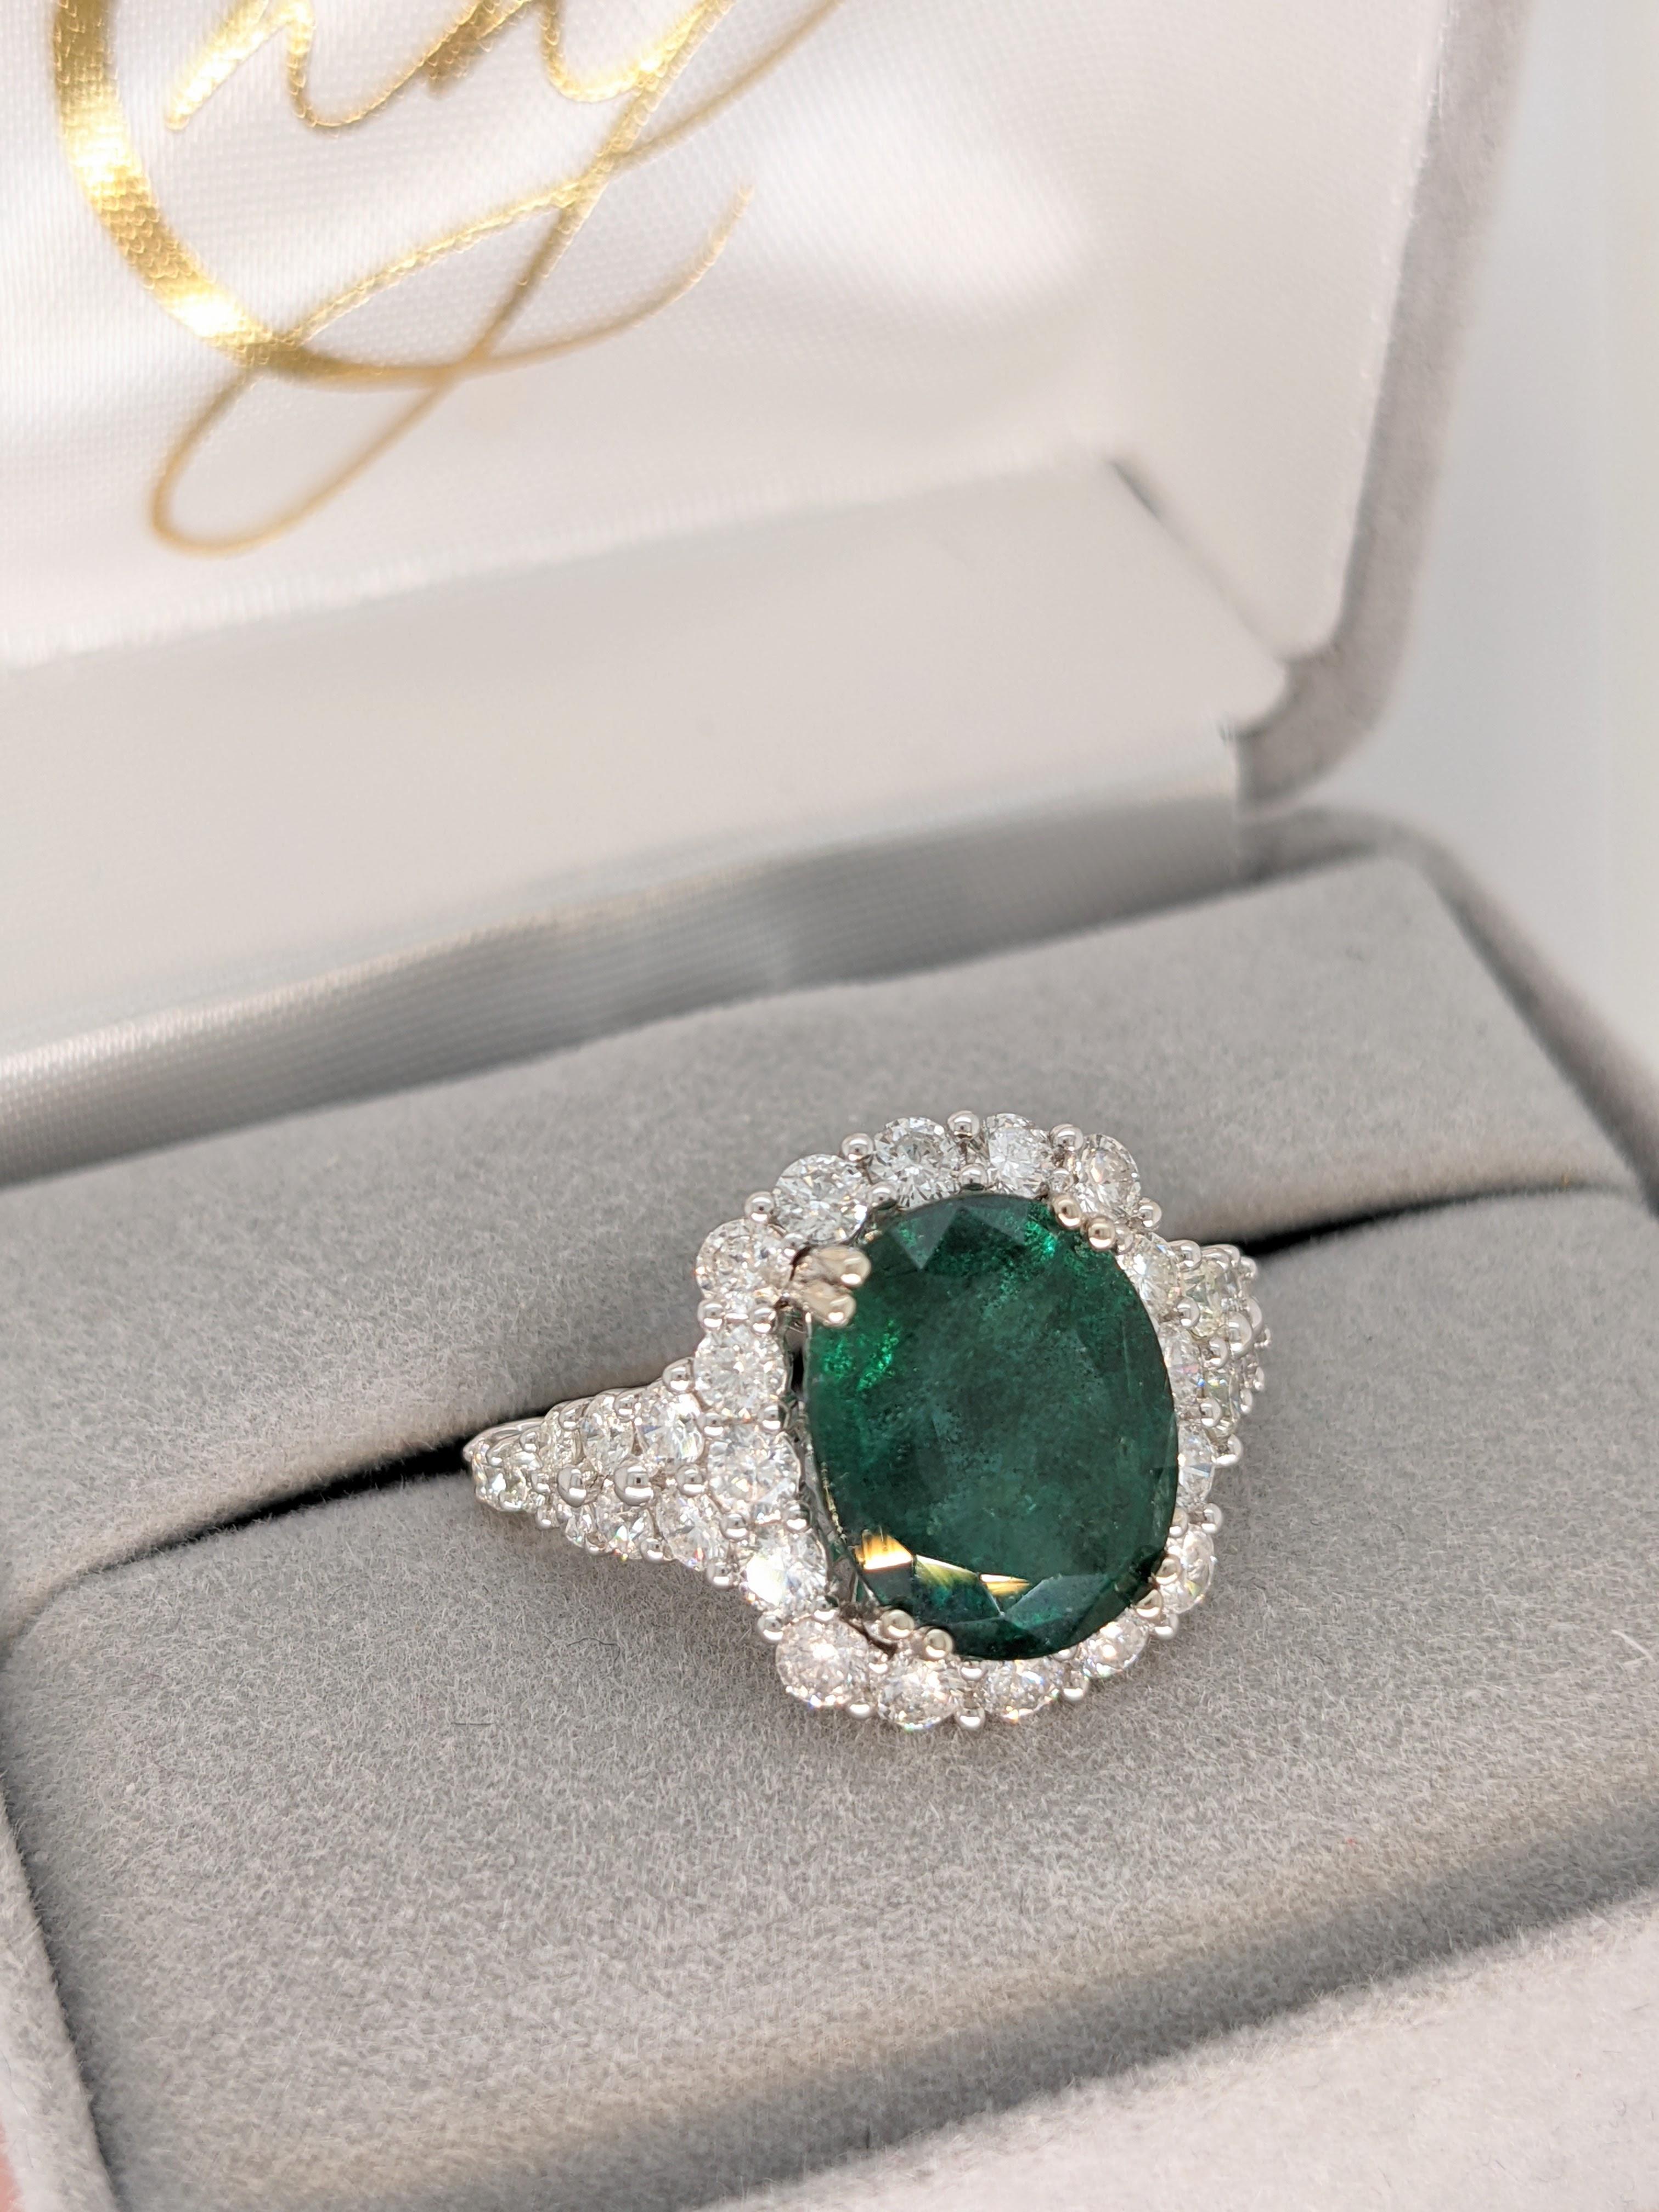 3 Carat Emerald Ring in 14k Solid White Gold with a Halo of Natural Diamonds For Sale 2